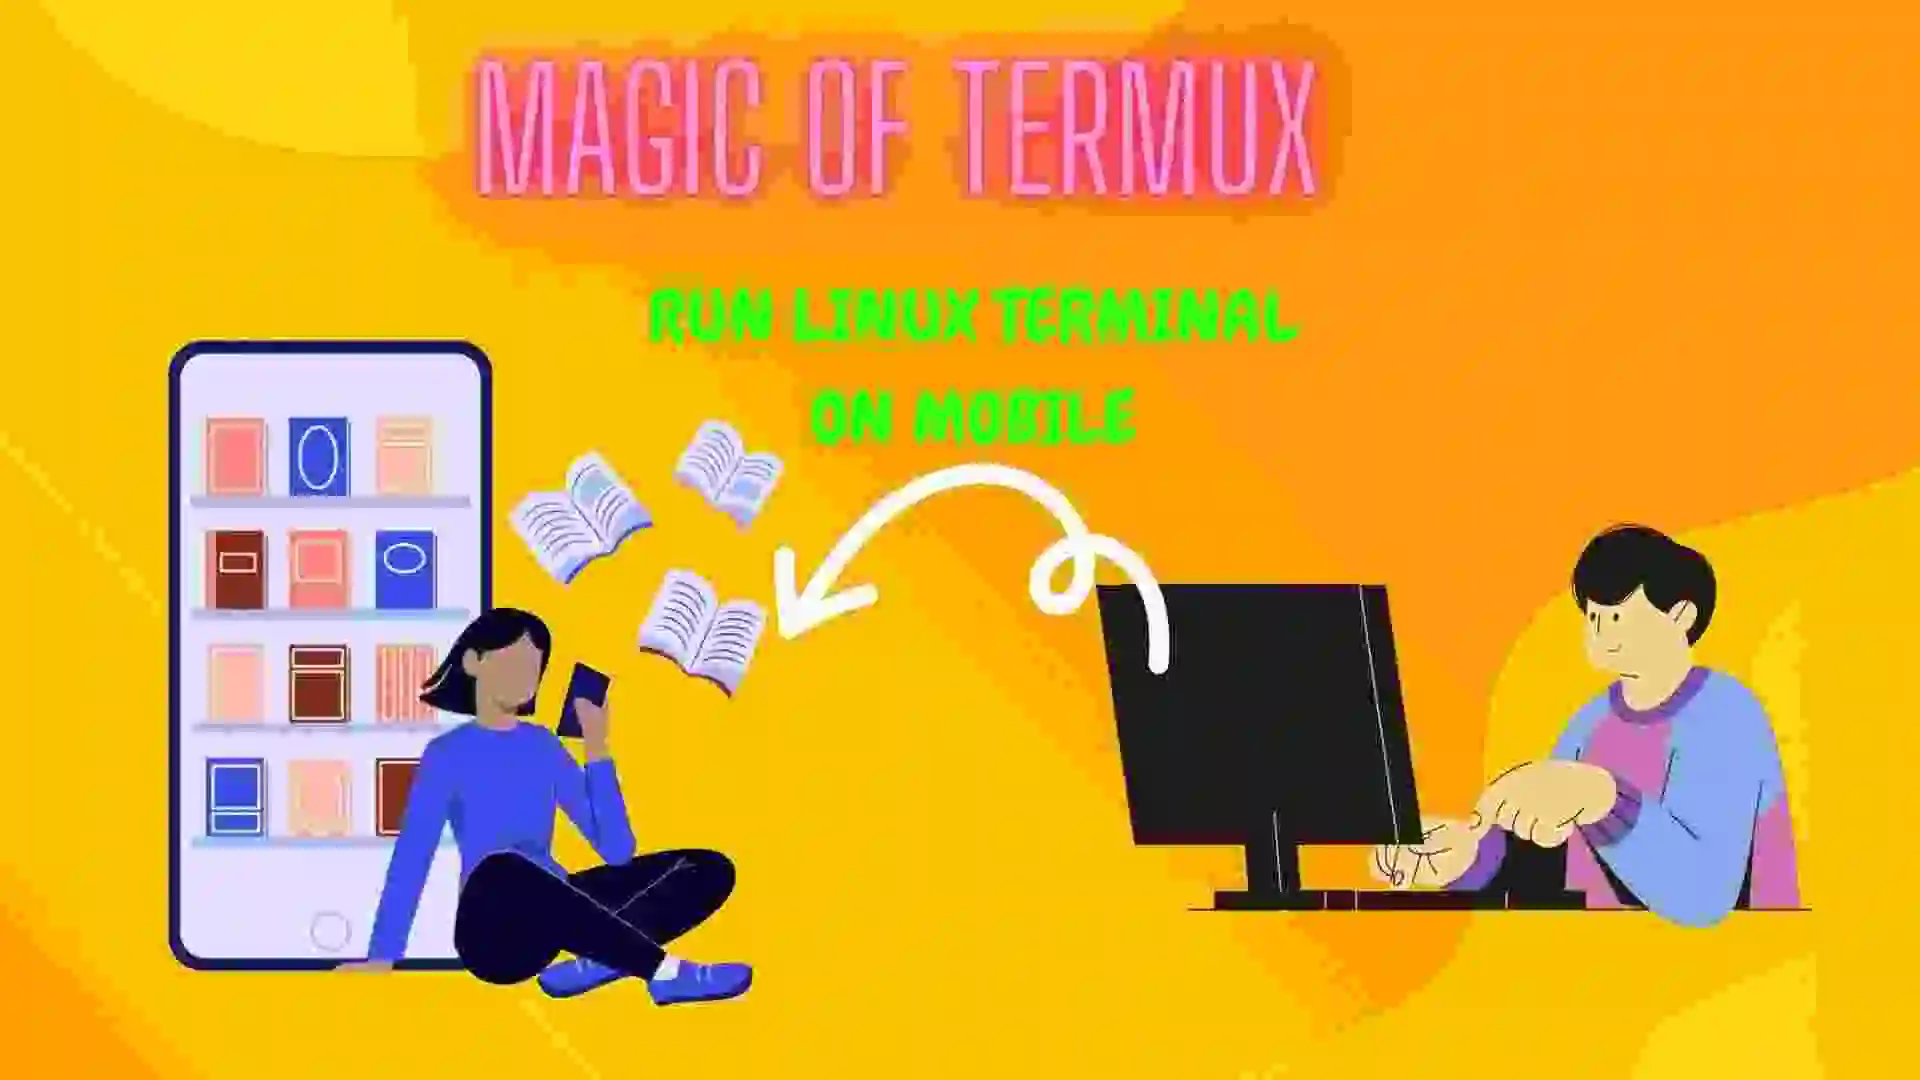 Introduction to Termux | Termux Introduction